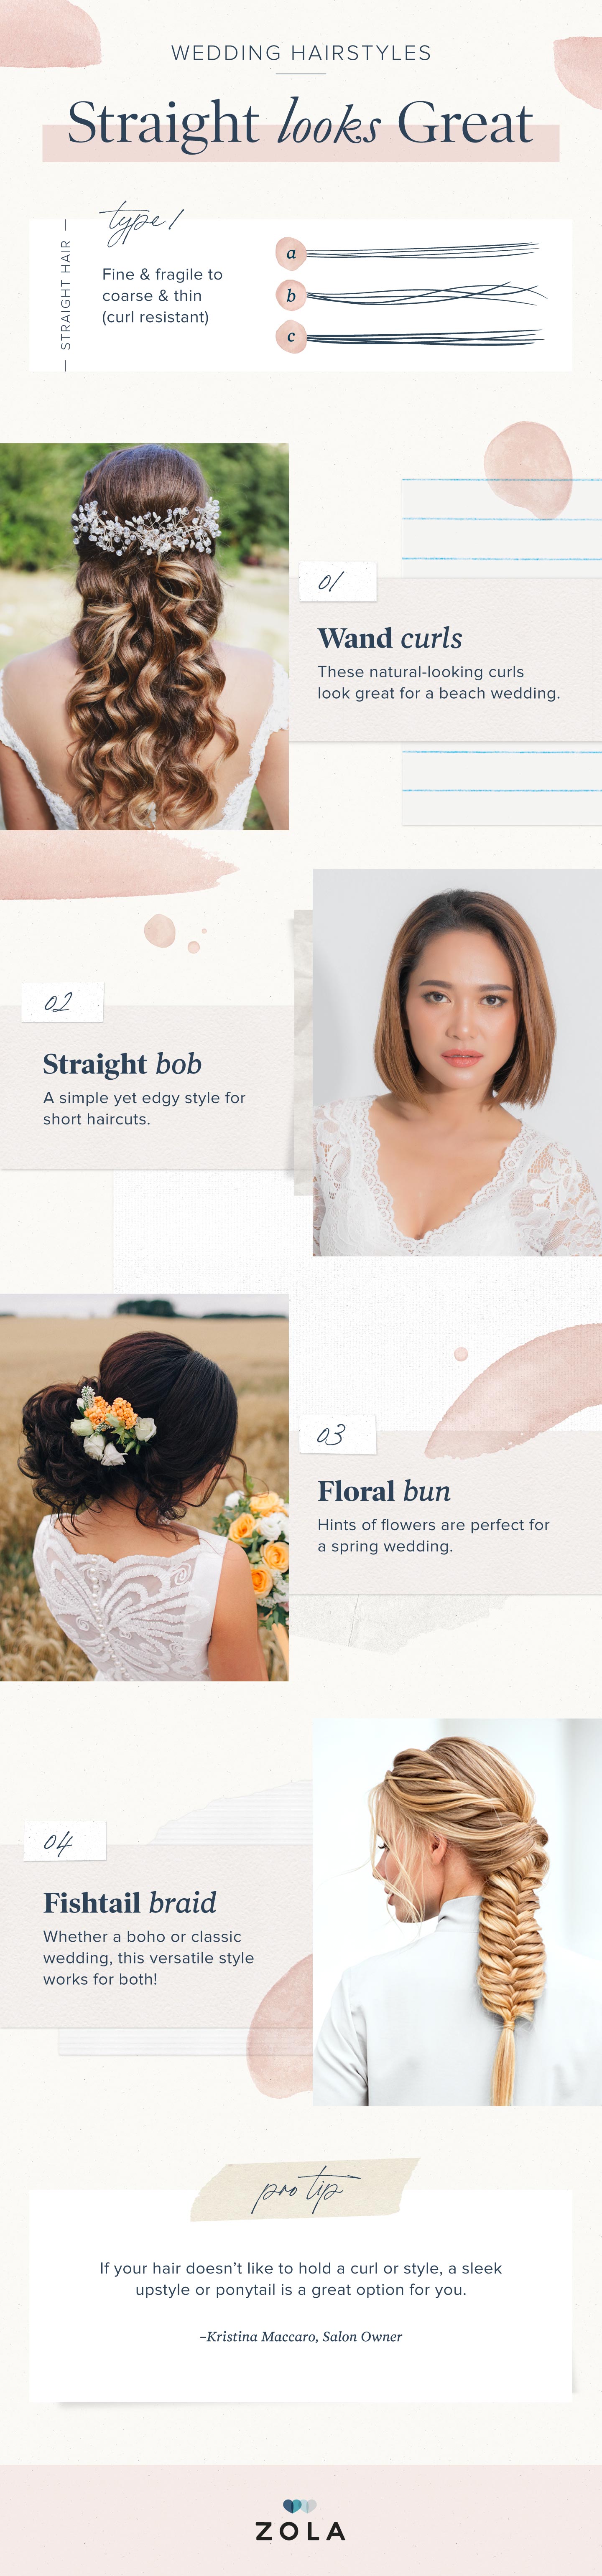 straight hairstyles for wedding moodboard